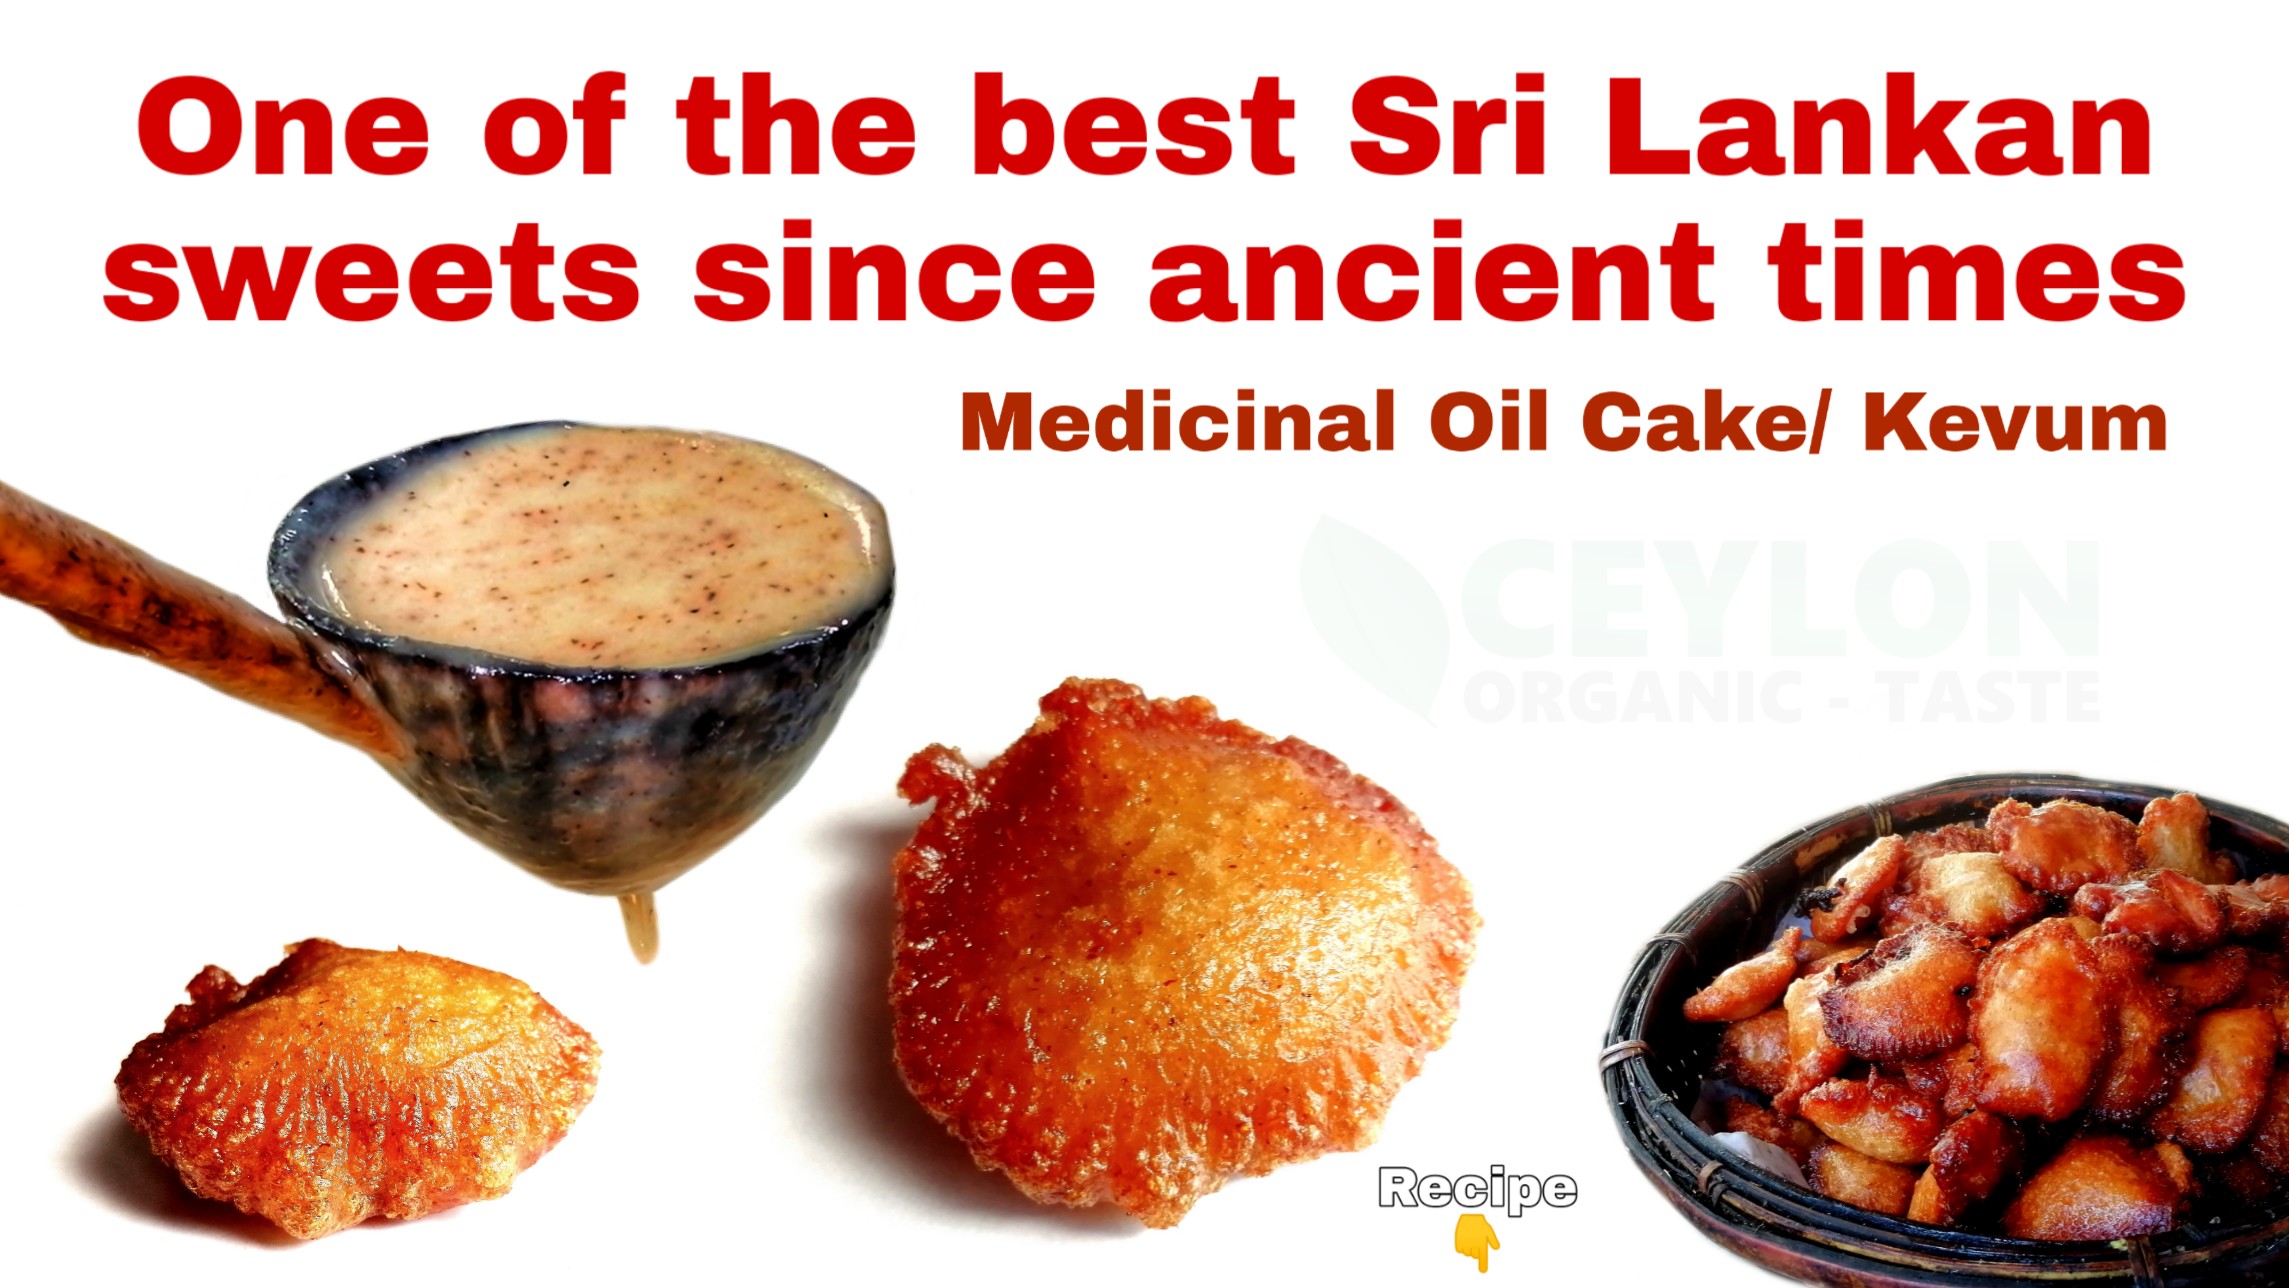 One of the best Sri Lankan Sweets since ancient times – Oil cake Kevum